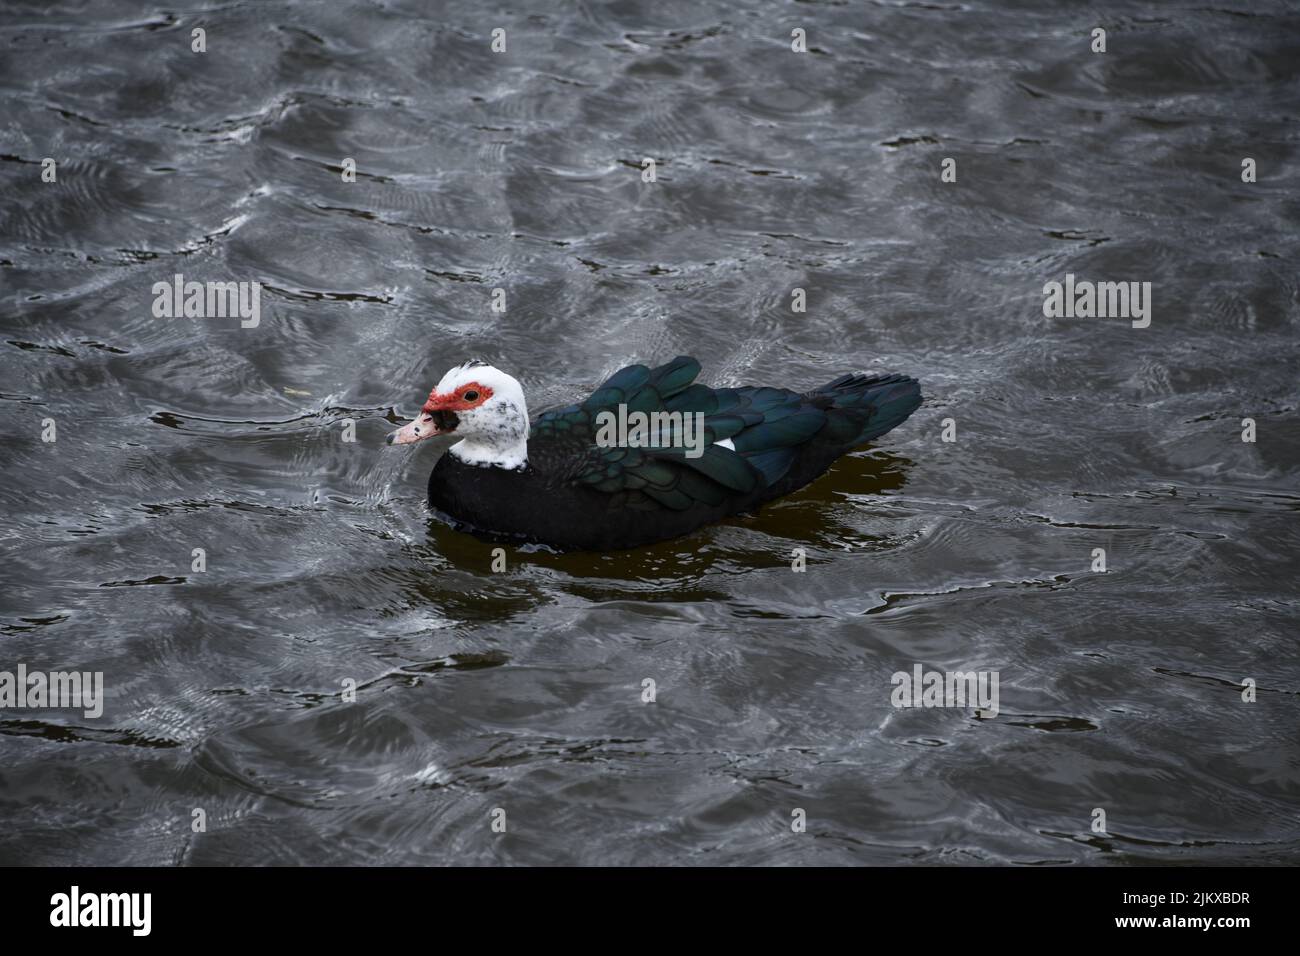 A Muscovy Duck with black feathers swimming in a wavy gray lake Stock Photo